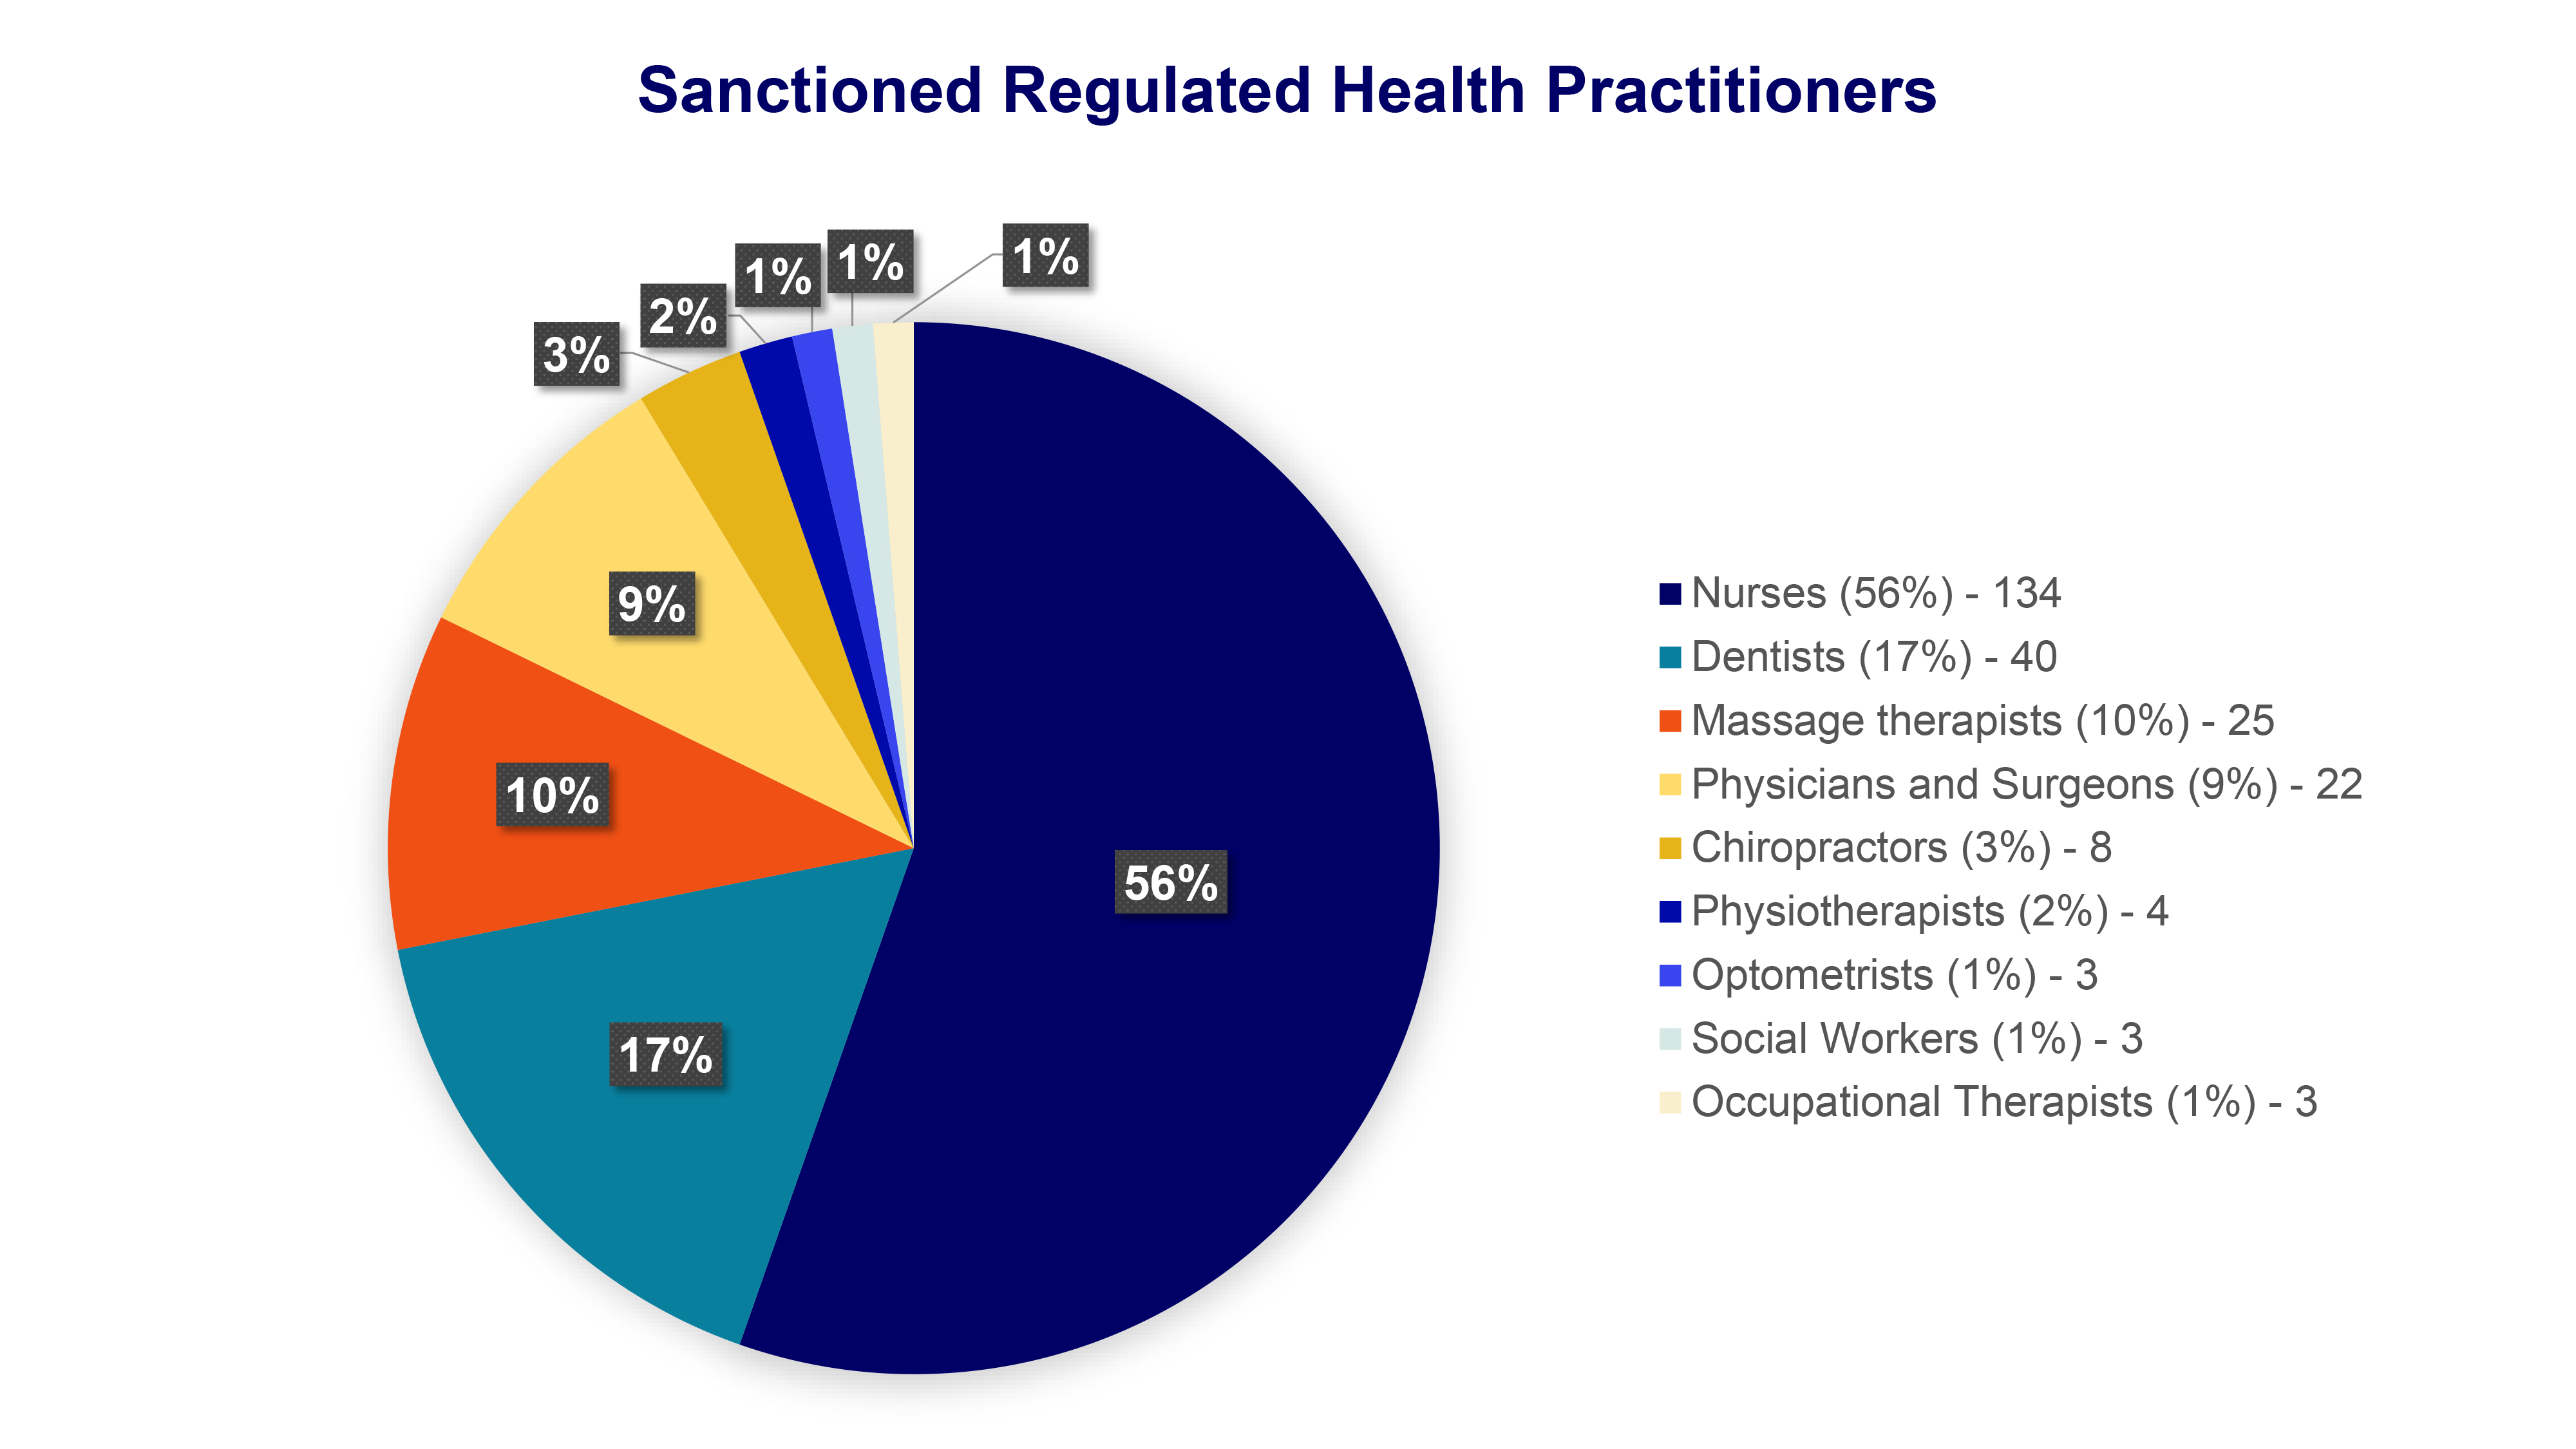 Sanctioned Regulated Health Practitioners